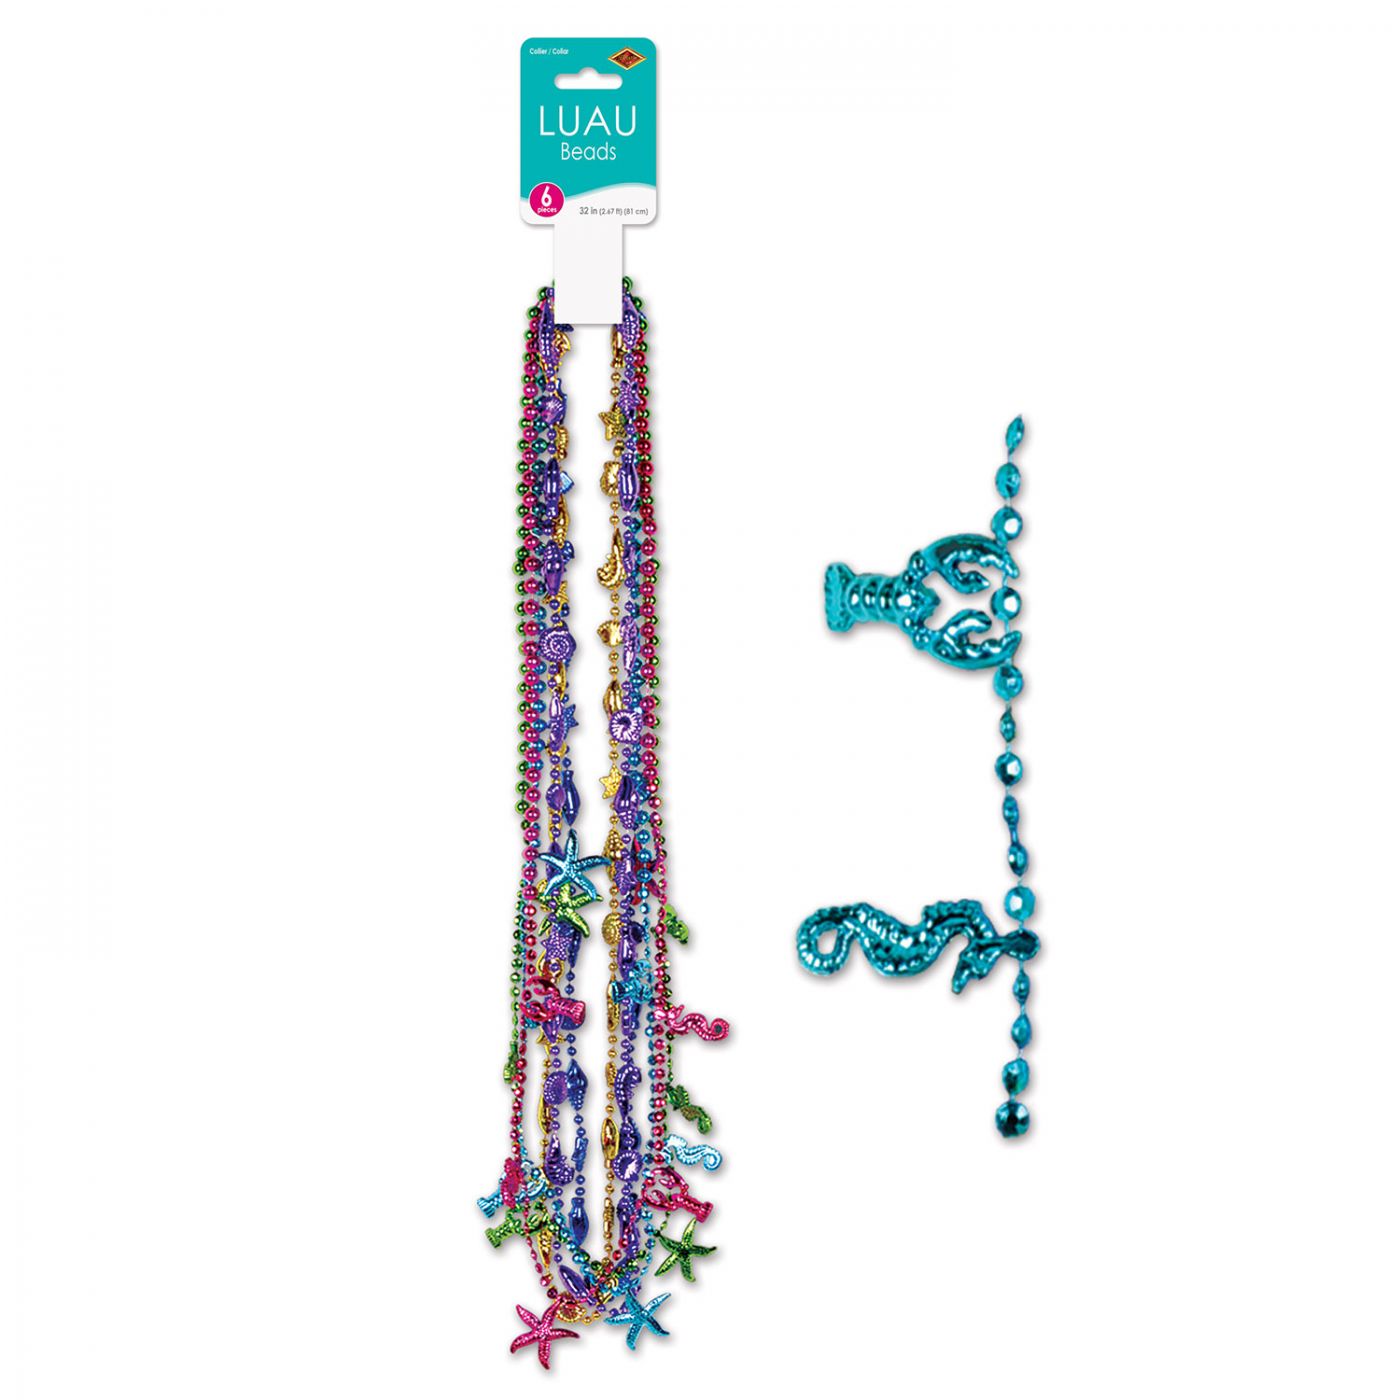 Luau Beads - 81.3cm - Assorted Designs - Pack of 6